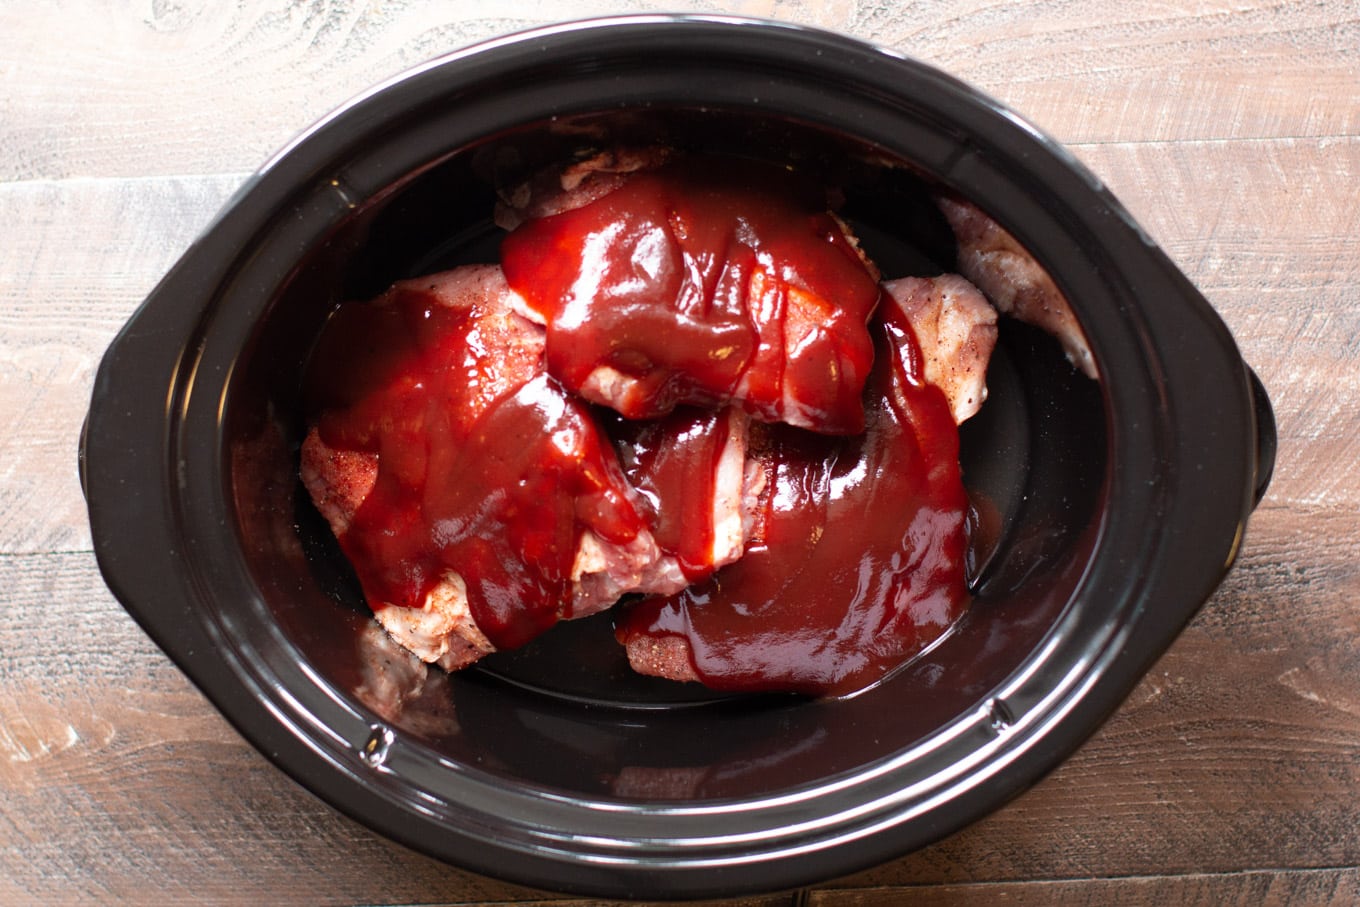 Raw ribs in the slow cooker with barbecue sauce on top.